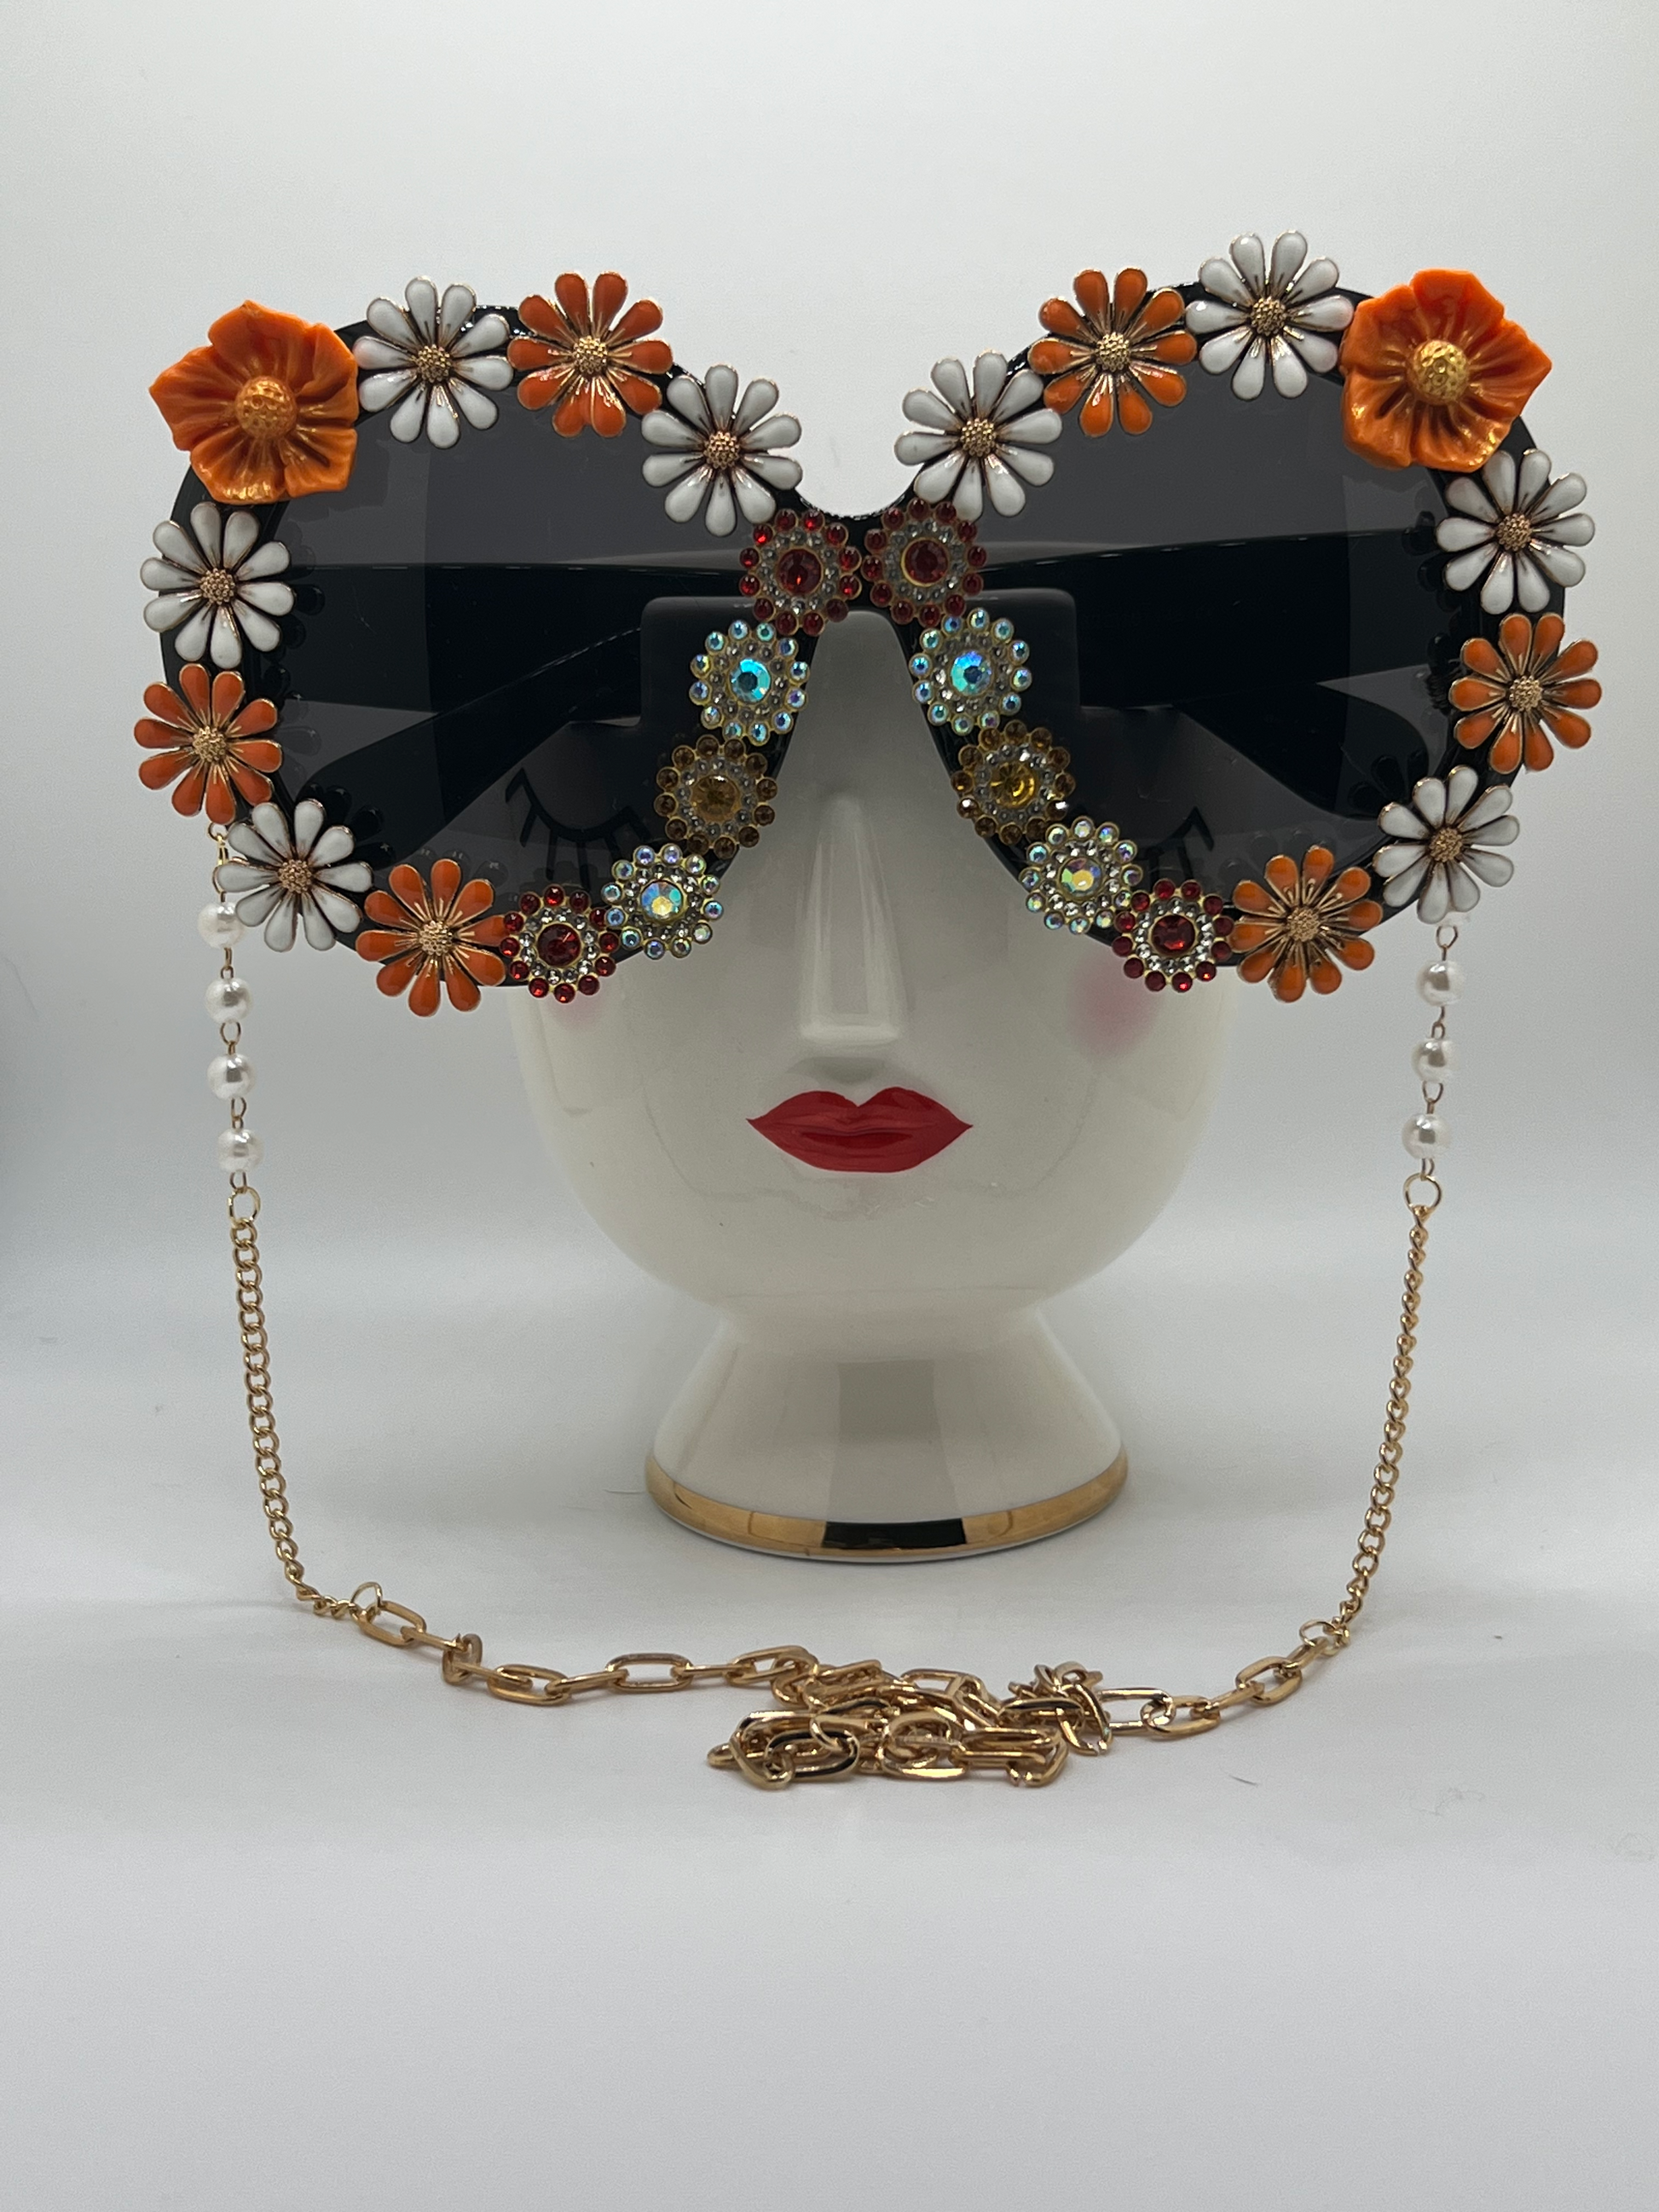 Perfect for tailgating and supporting your Longhorns, these round, oversized sunglasses are covered in floral and jeweled embellishments and come with a removable chain.